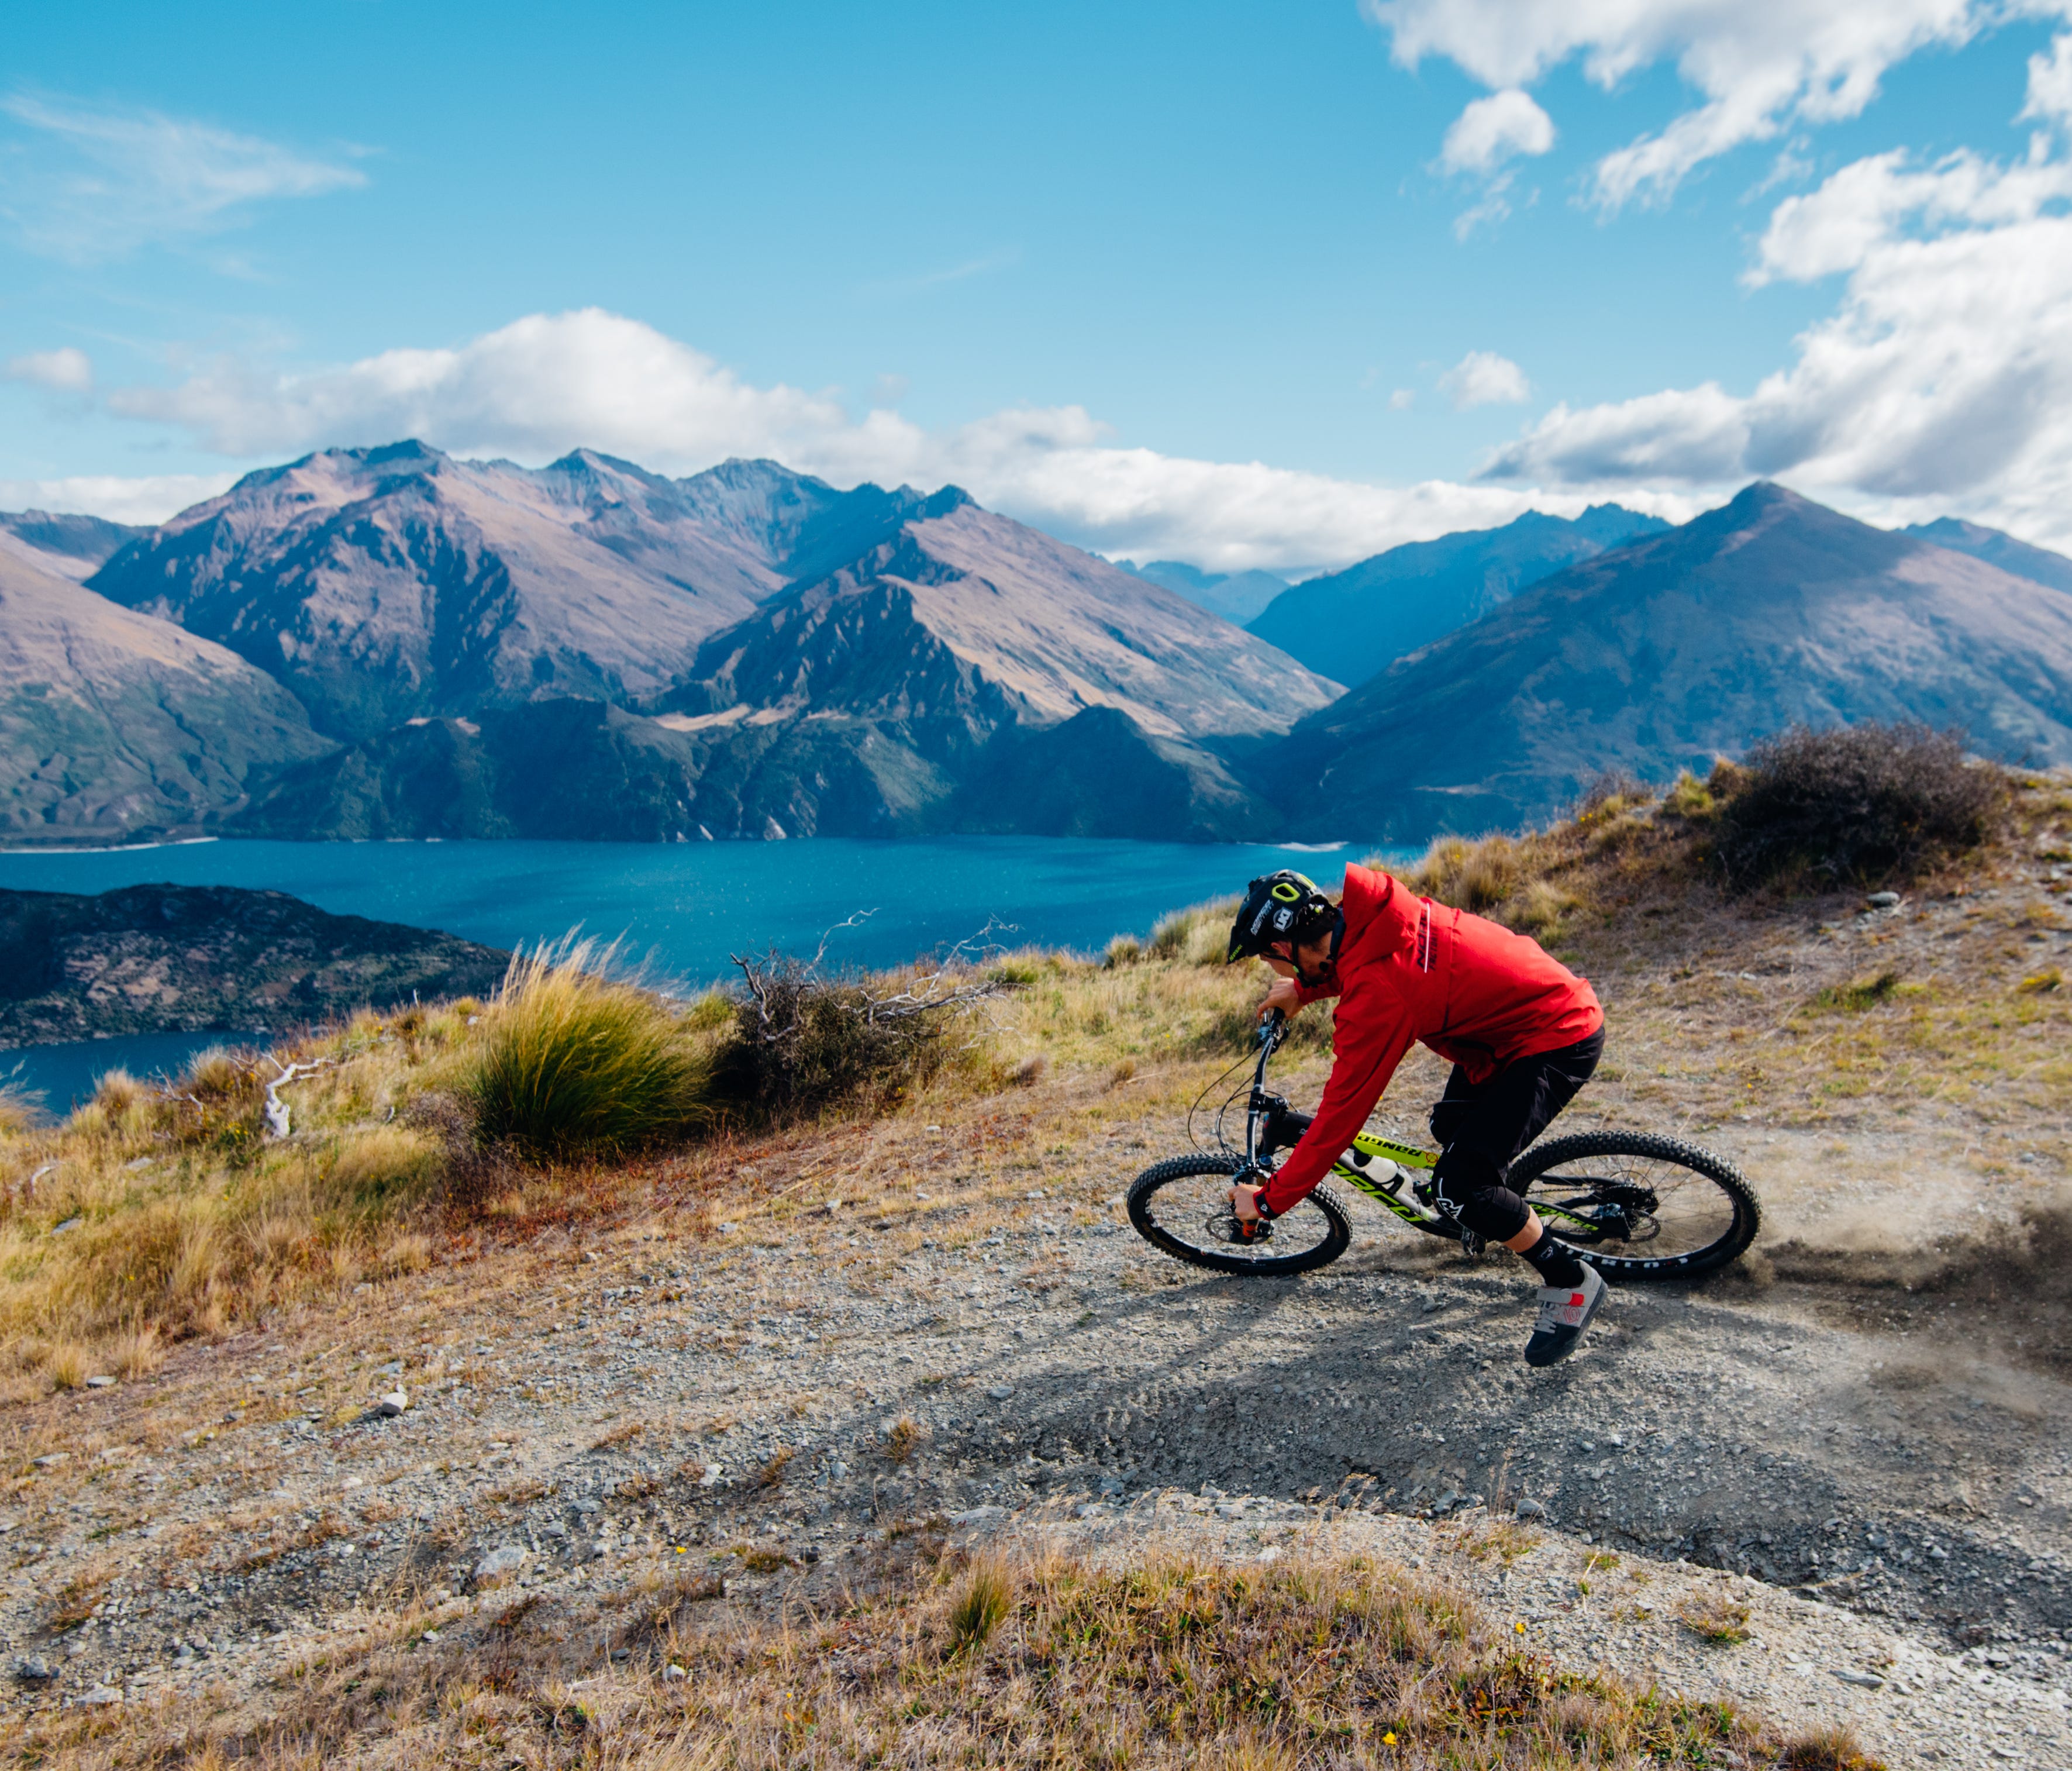 Part of a high-country sheep station alongside Lake Wanaka, Mount Burke has schist-gravel ground that always delivers a satisfying slide while cornering. Expect massive scenery and even bigger fun.